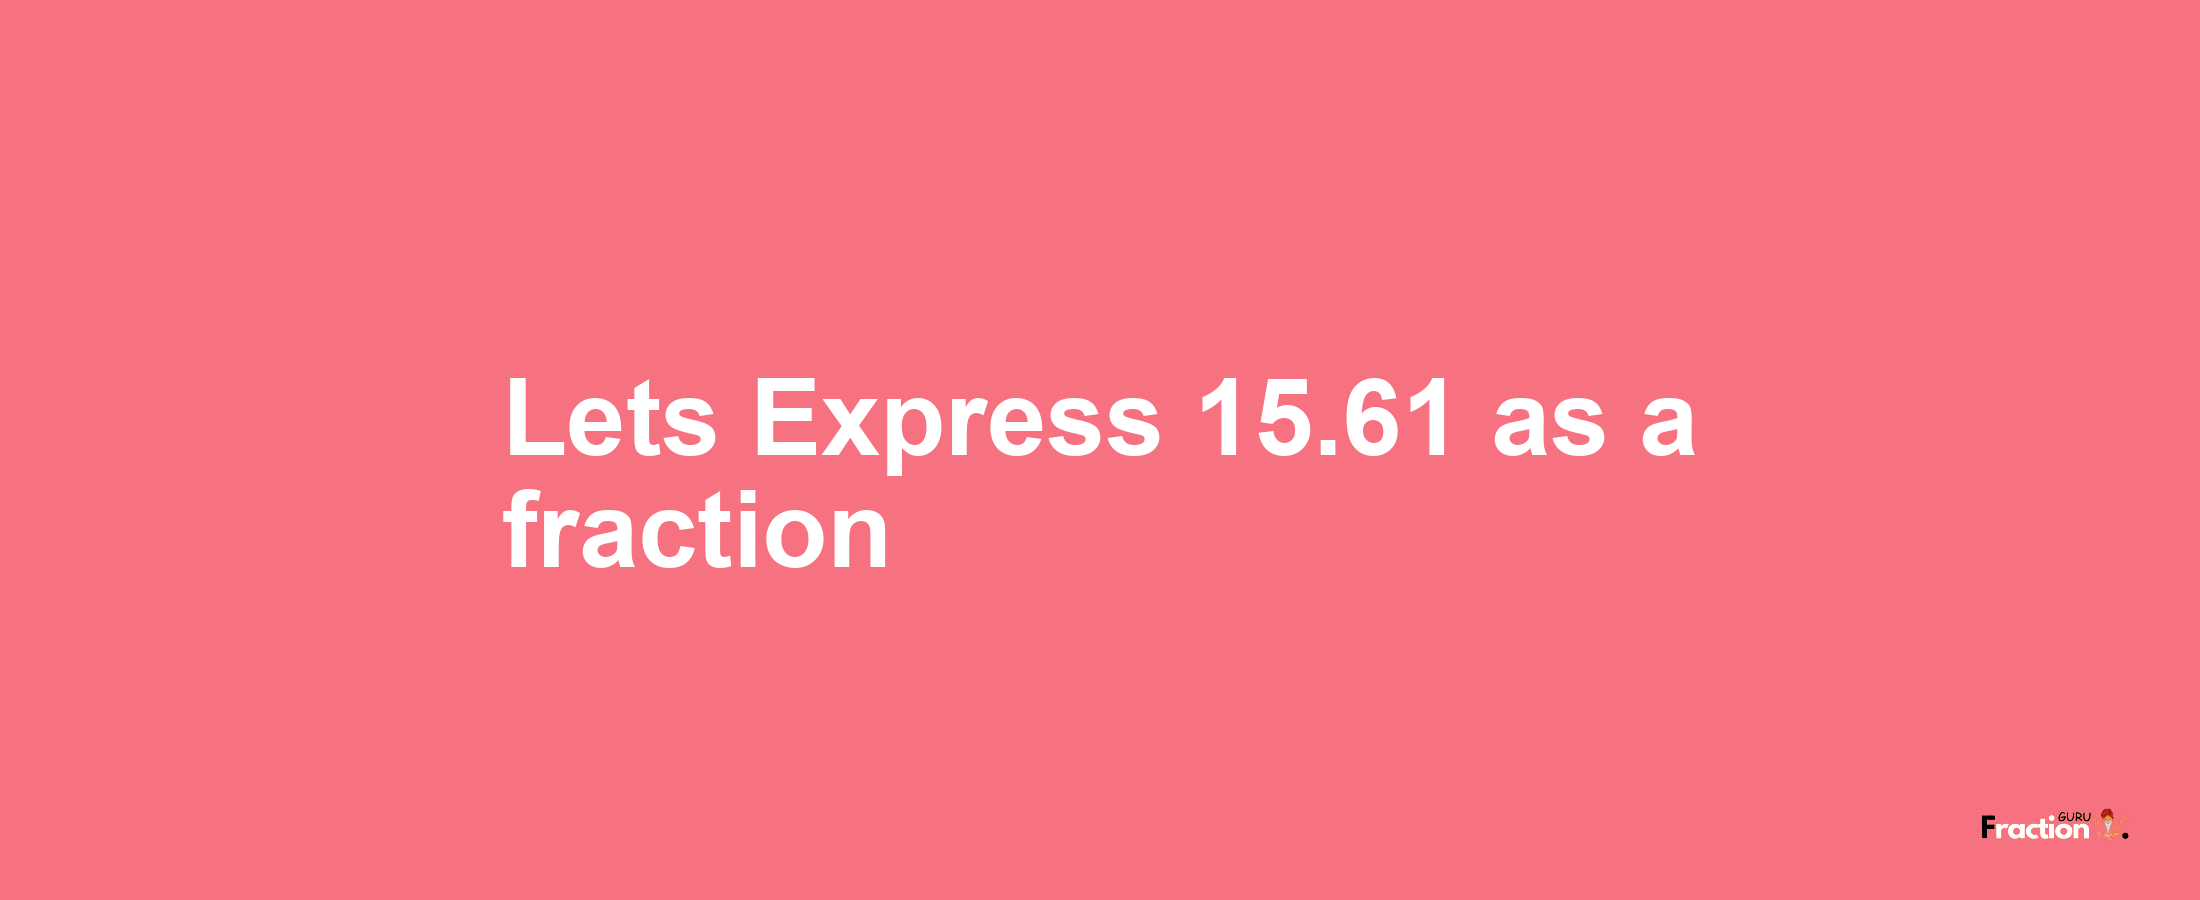 Lets Express 15.61 as afraction